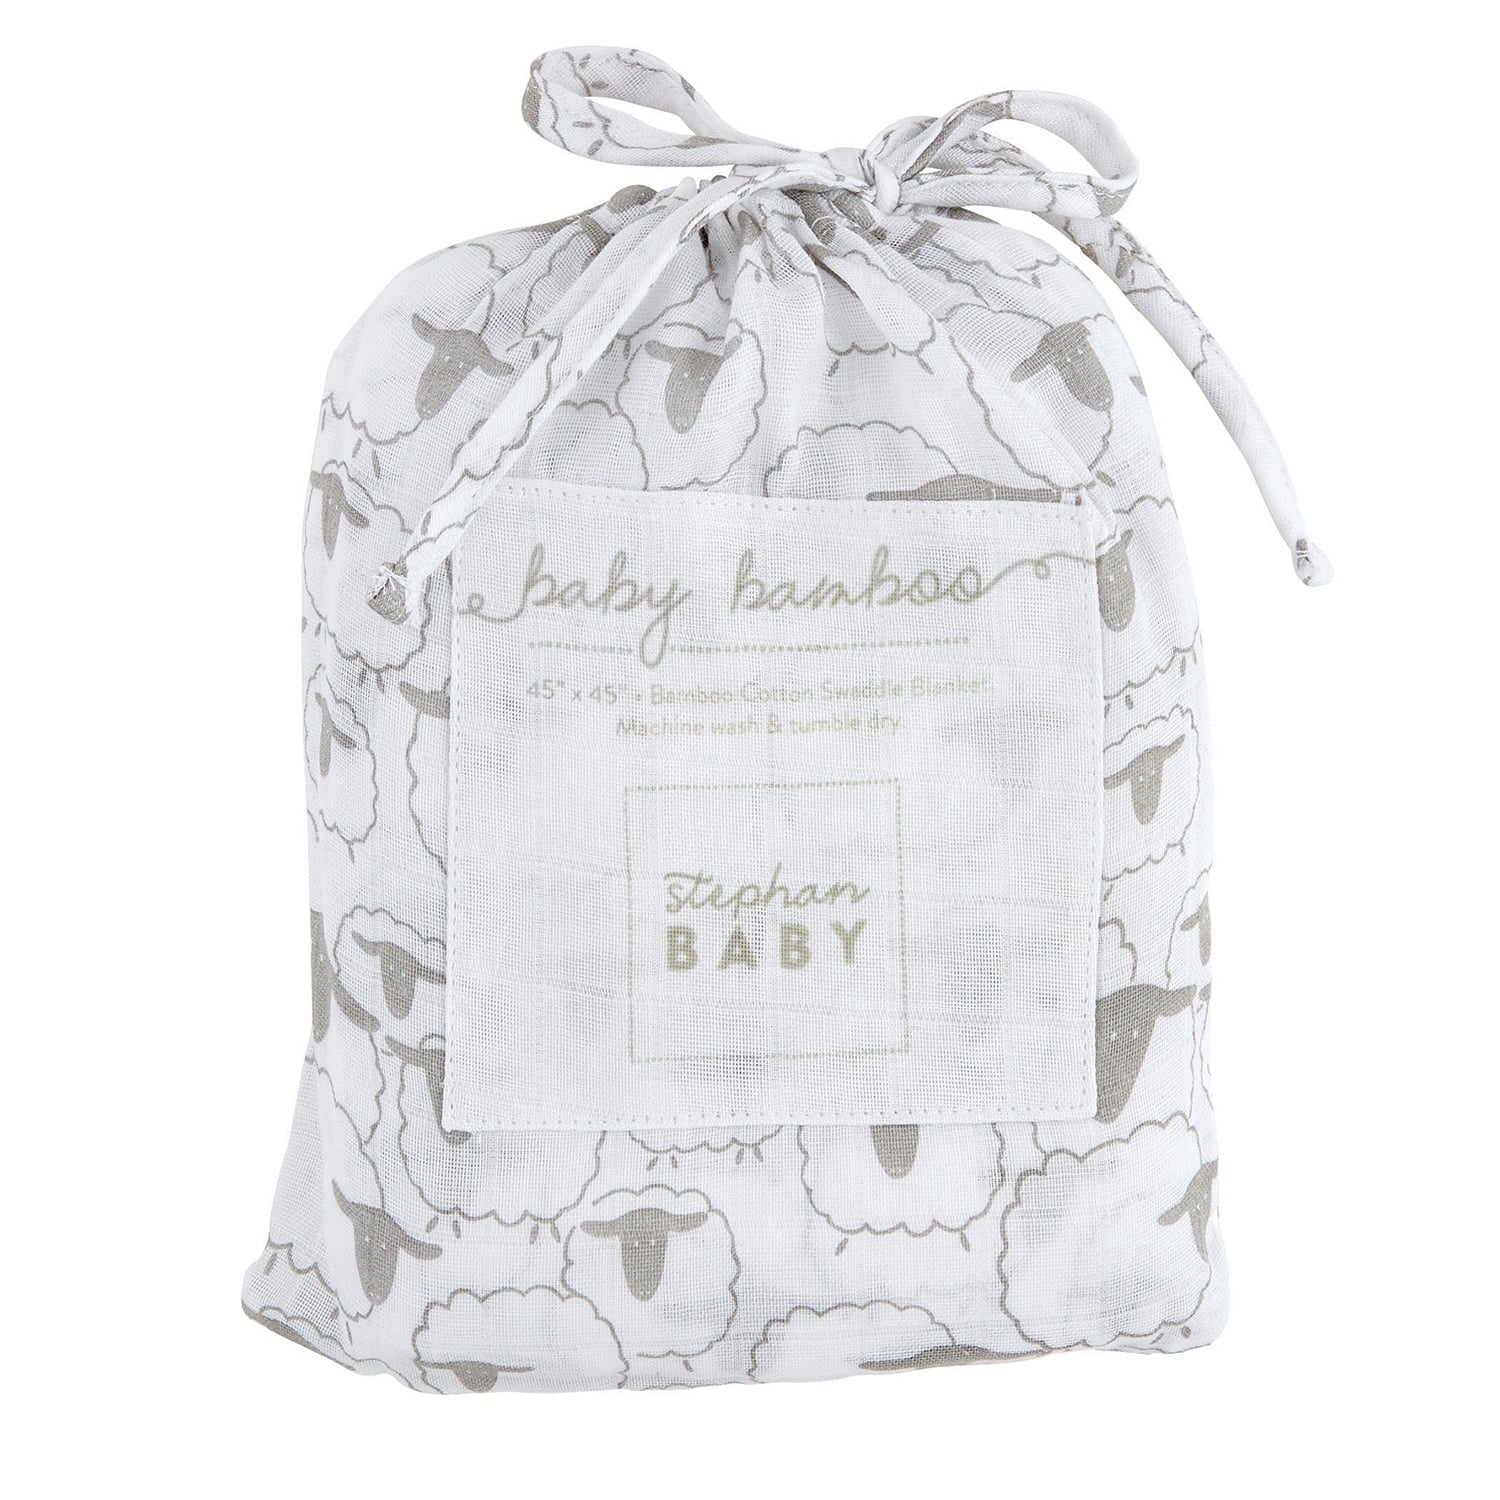 sheep bamboo swaddle blanket included in our snips & snails & puppy dog tails gift basket